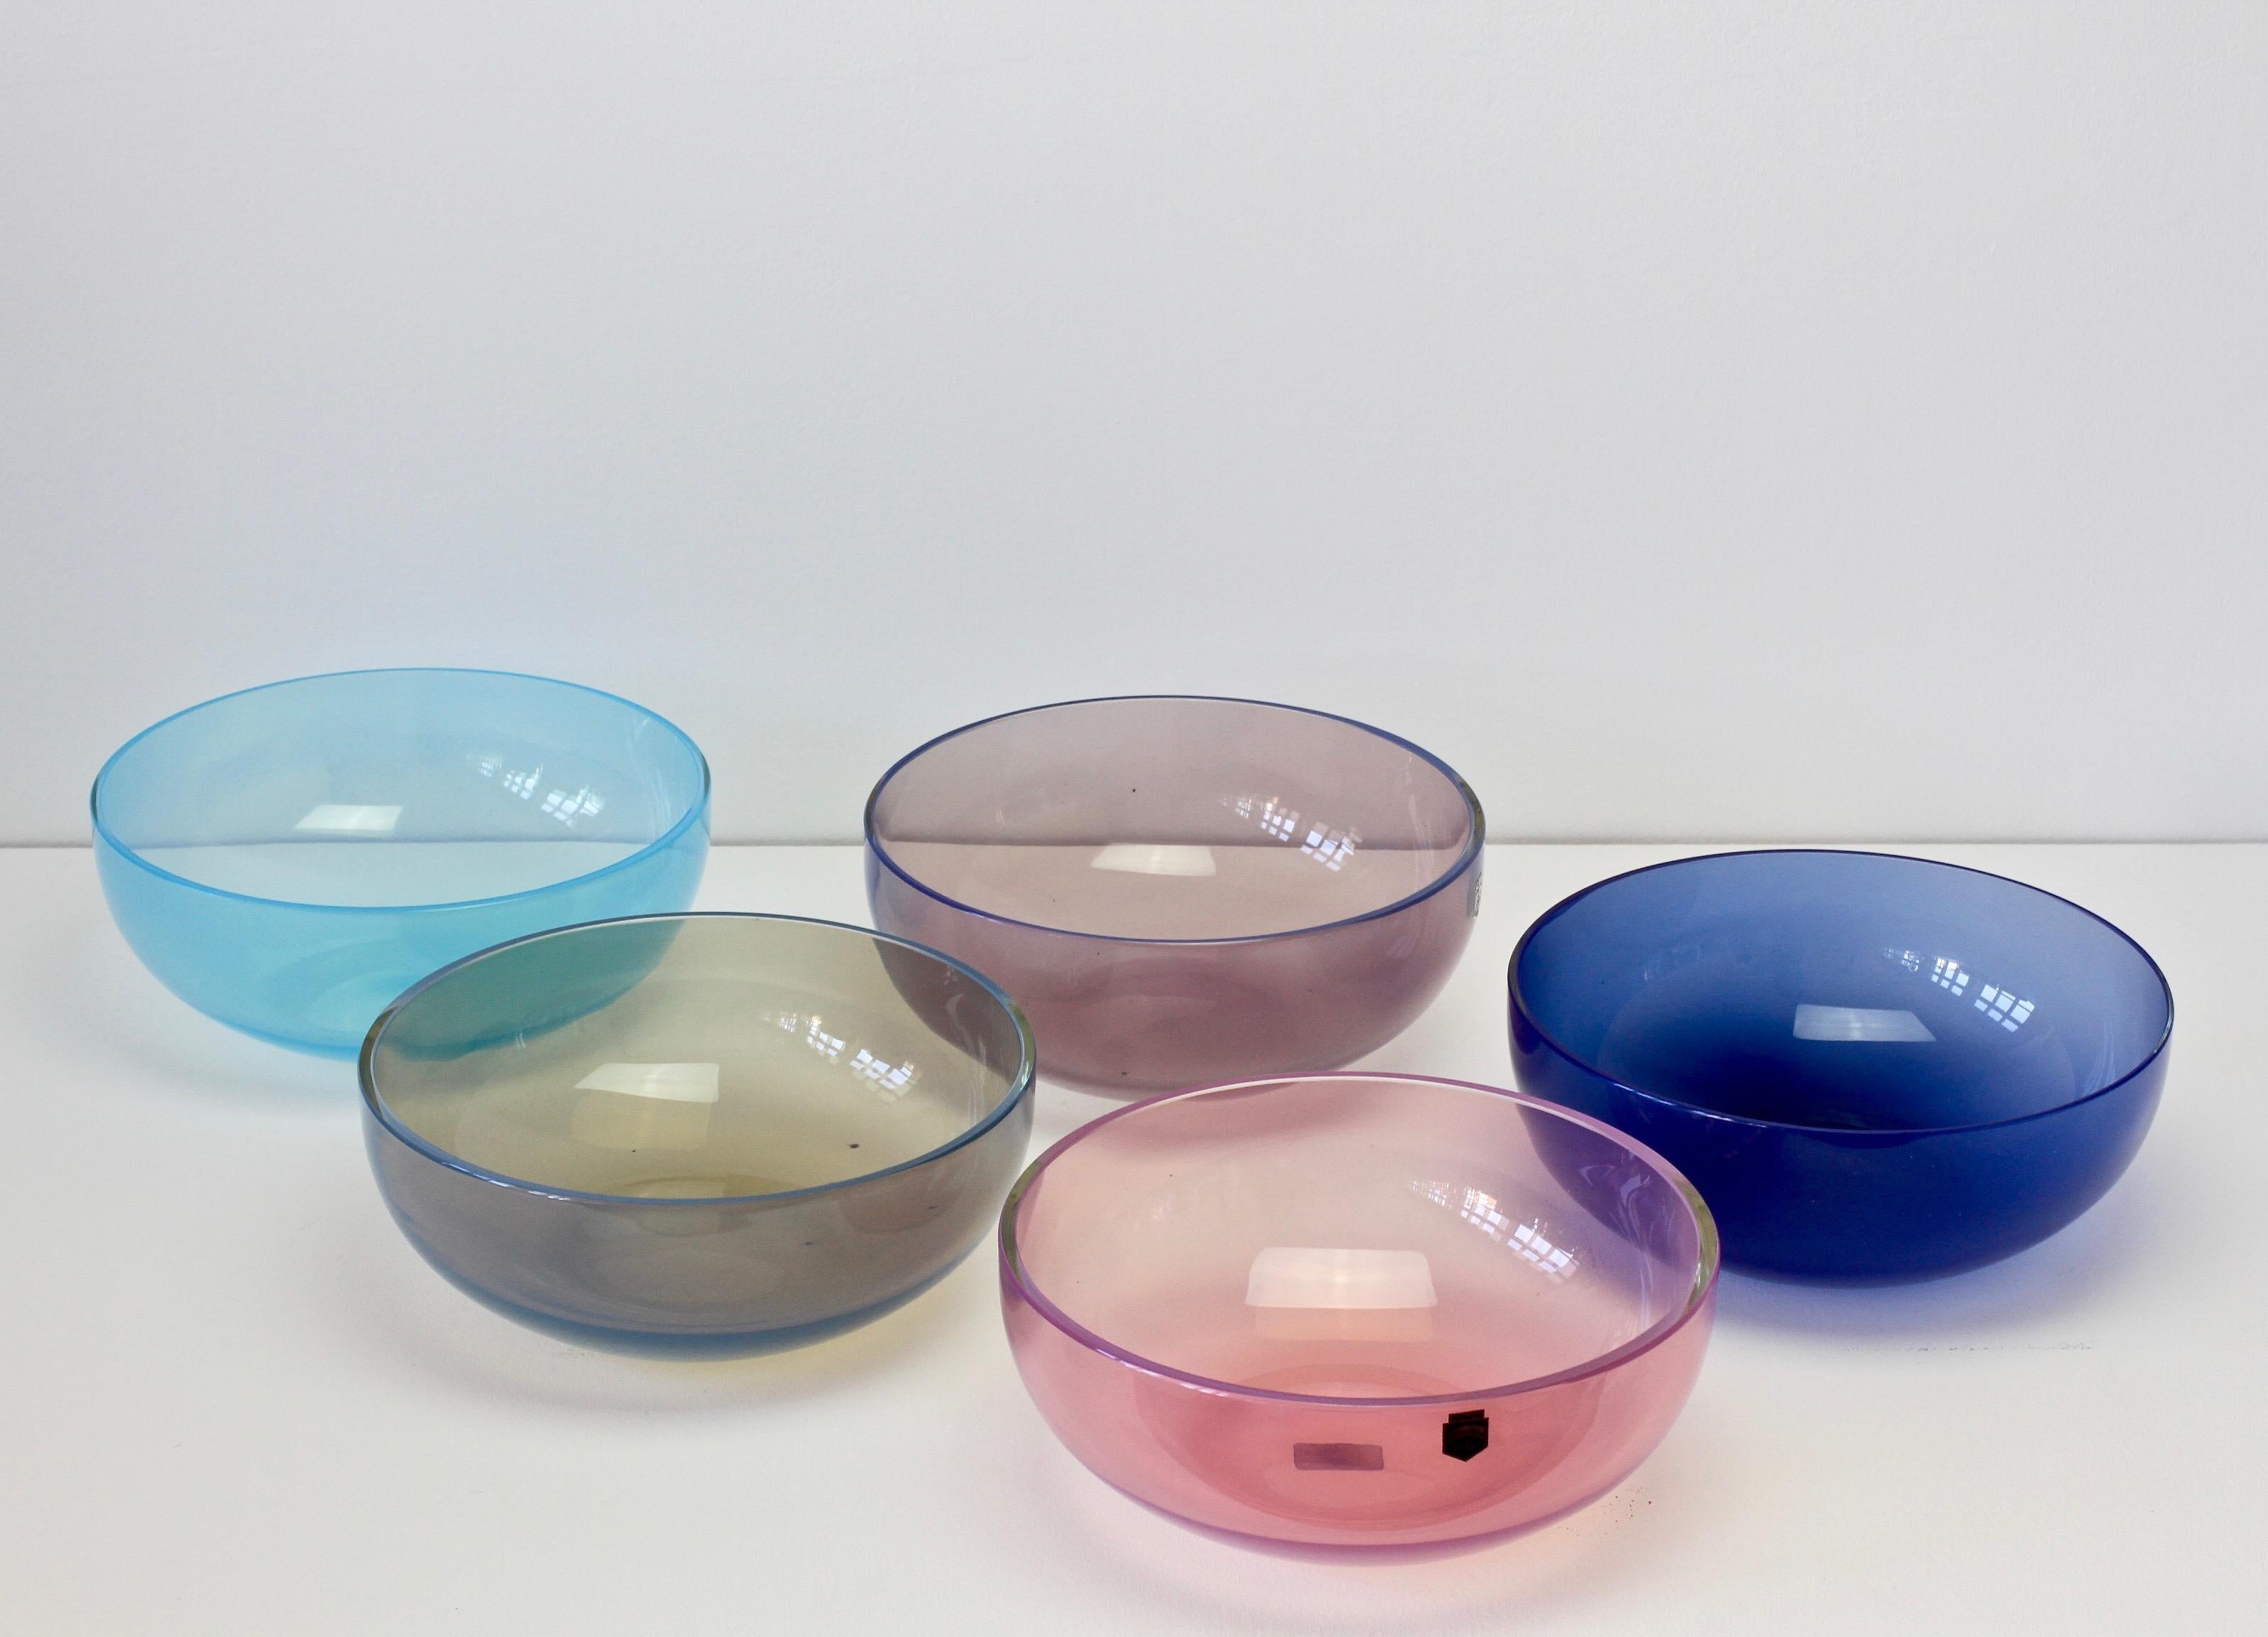 Signed set or ensemble of five 'Opalino' Murano glass bowls designed by Antonio da Ros (1936-2012) for Cenedese, circa 1970-1990. Wonderful translucent colors of vibrant blues, aubergine, moss green and pink. Simplistic yet elegant forms - almost